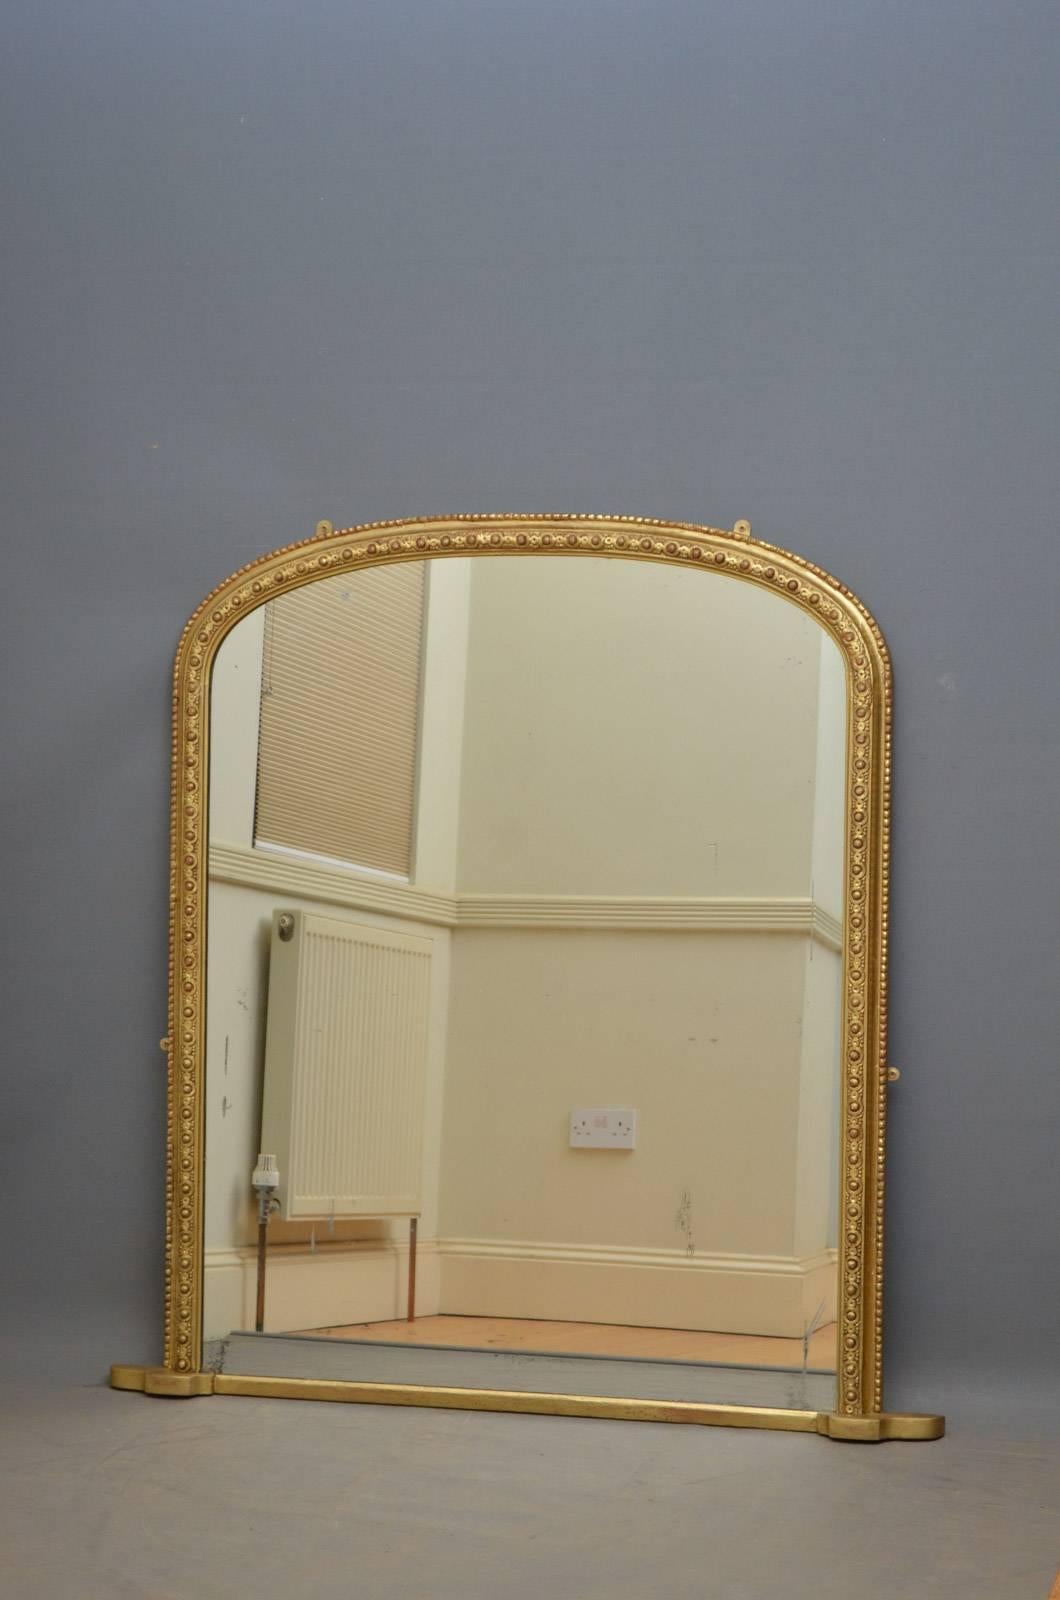 K0319, Victorian giltwood wall mirror, having original mirror plate with some foxing and imperfection in finely decorated frame. This antique mirror has been refinished, it retains its original panelled backboards and mirror plate which can be